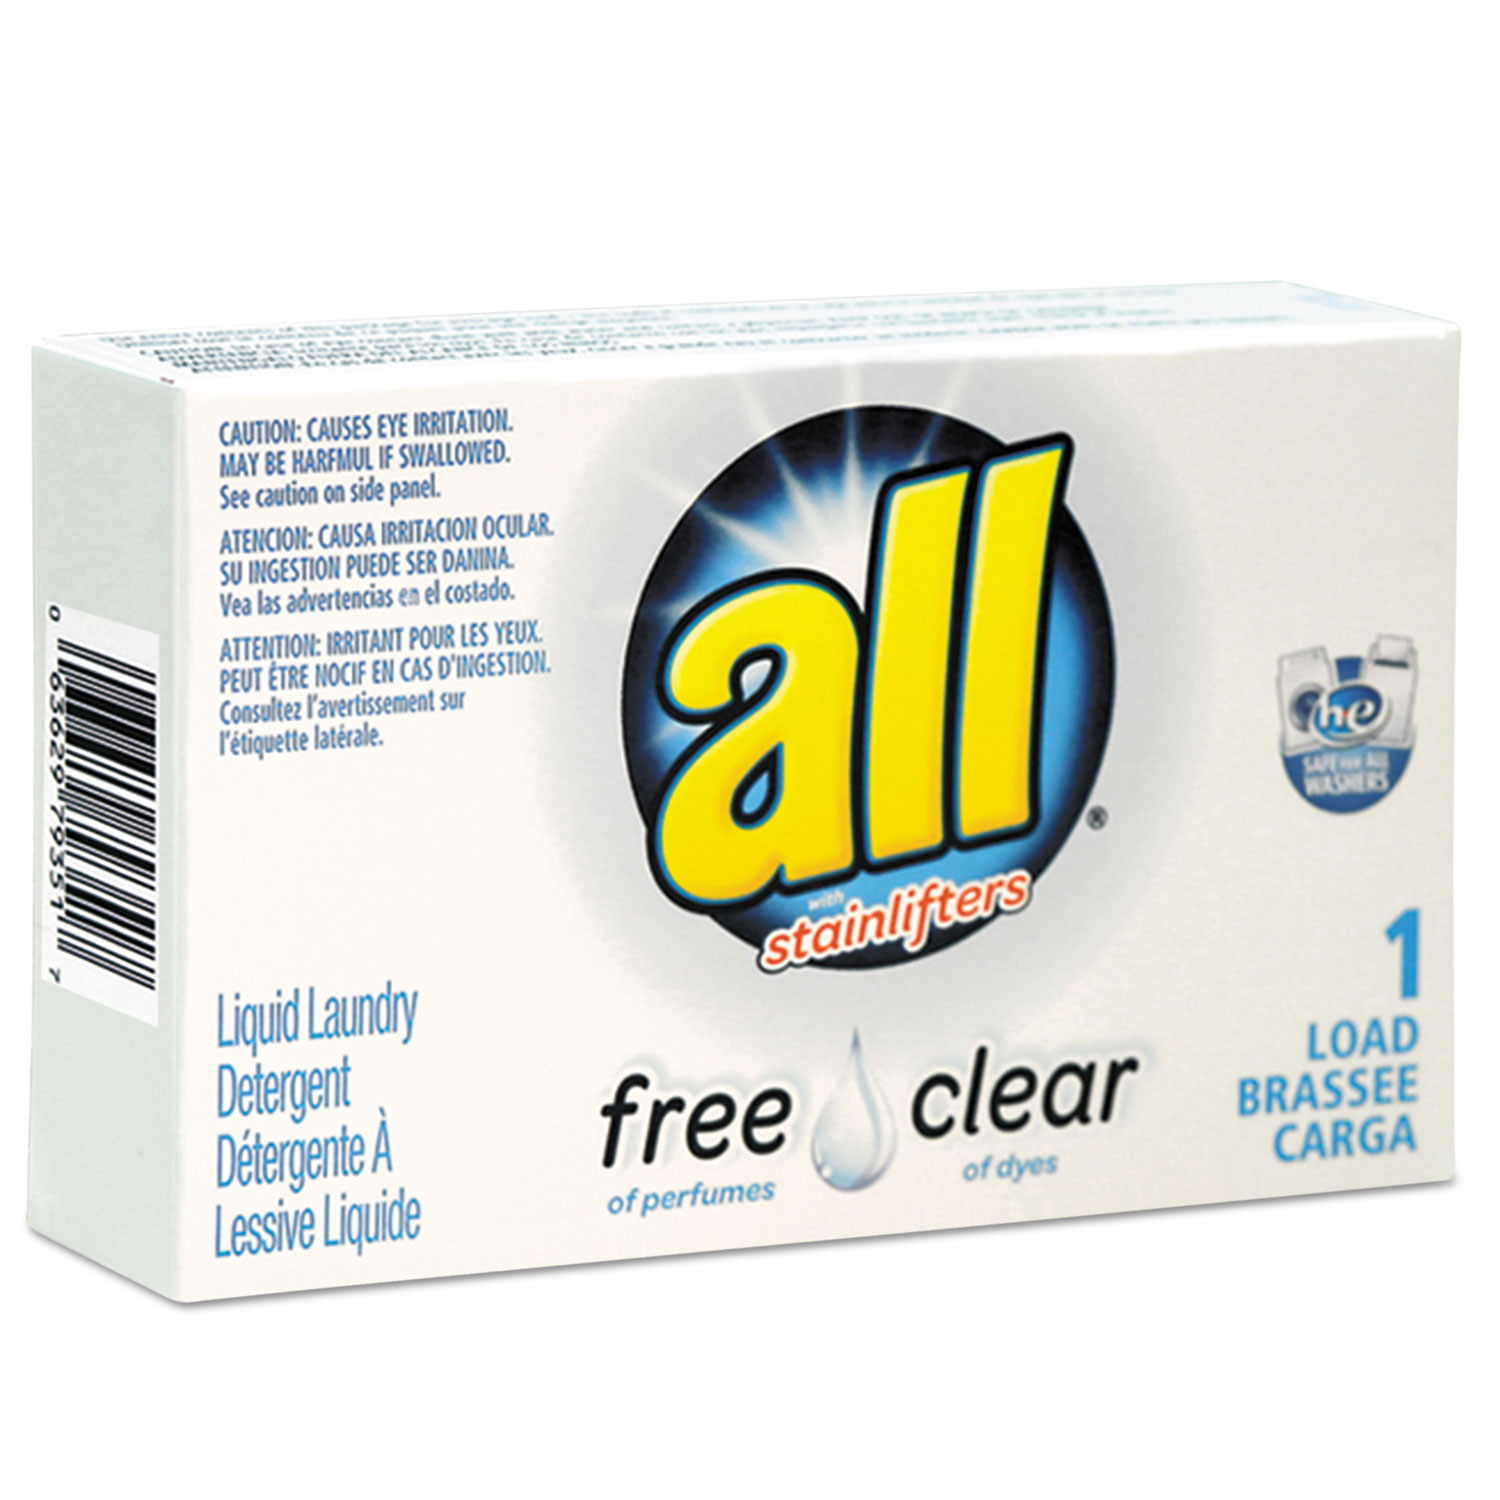  All R1-2979351 Free Clear HE Liquid Laundry Detergent, Unscented, 1.6 oz Vend-Box, 100/Carton (VEN2979351) 